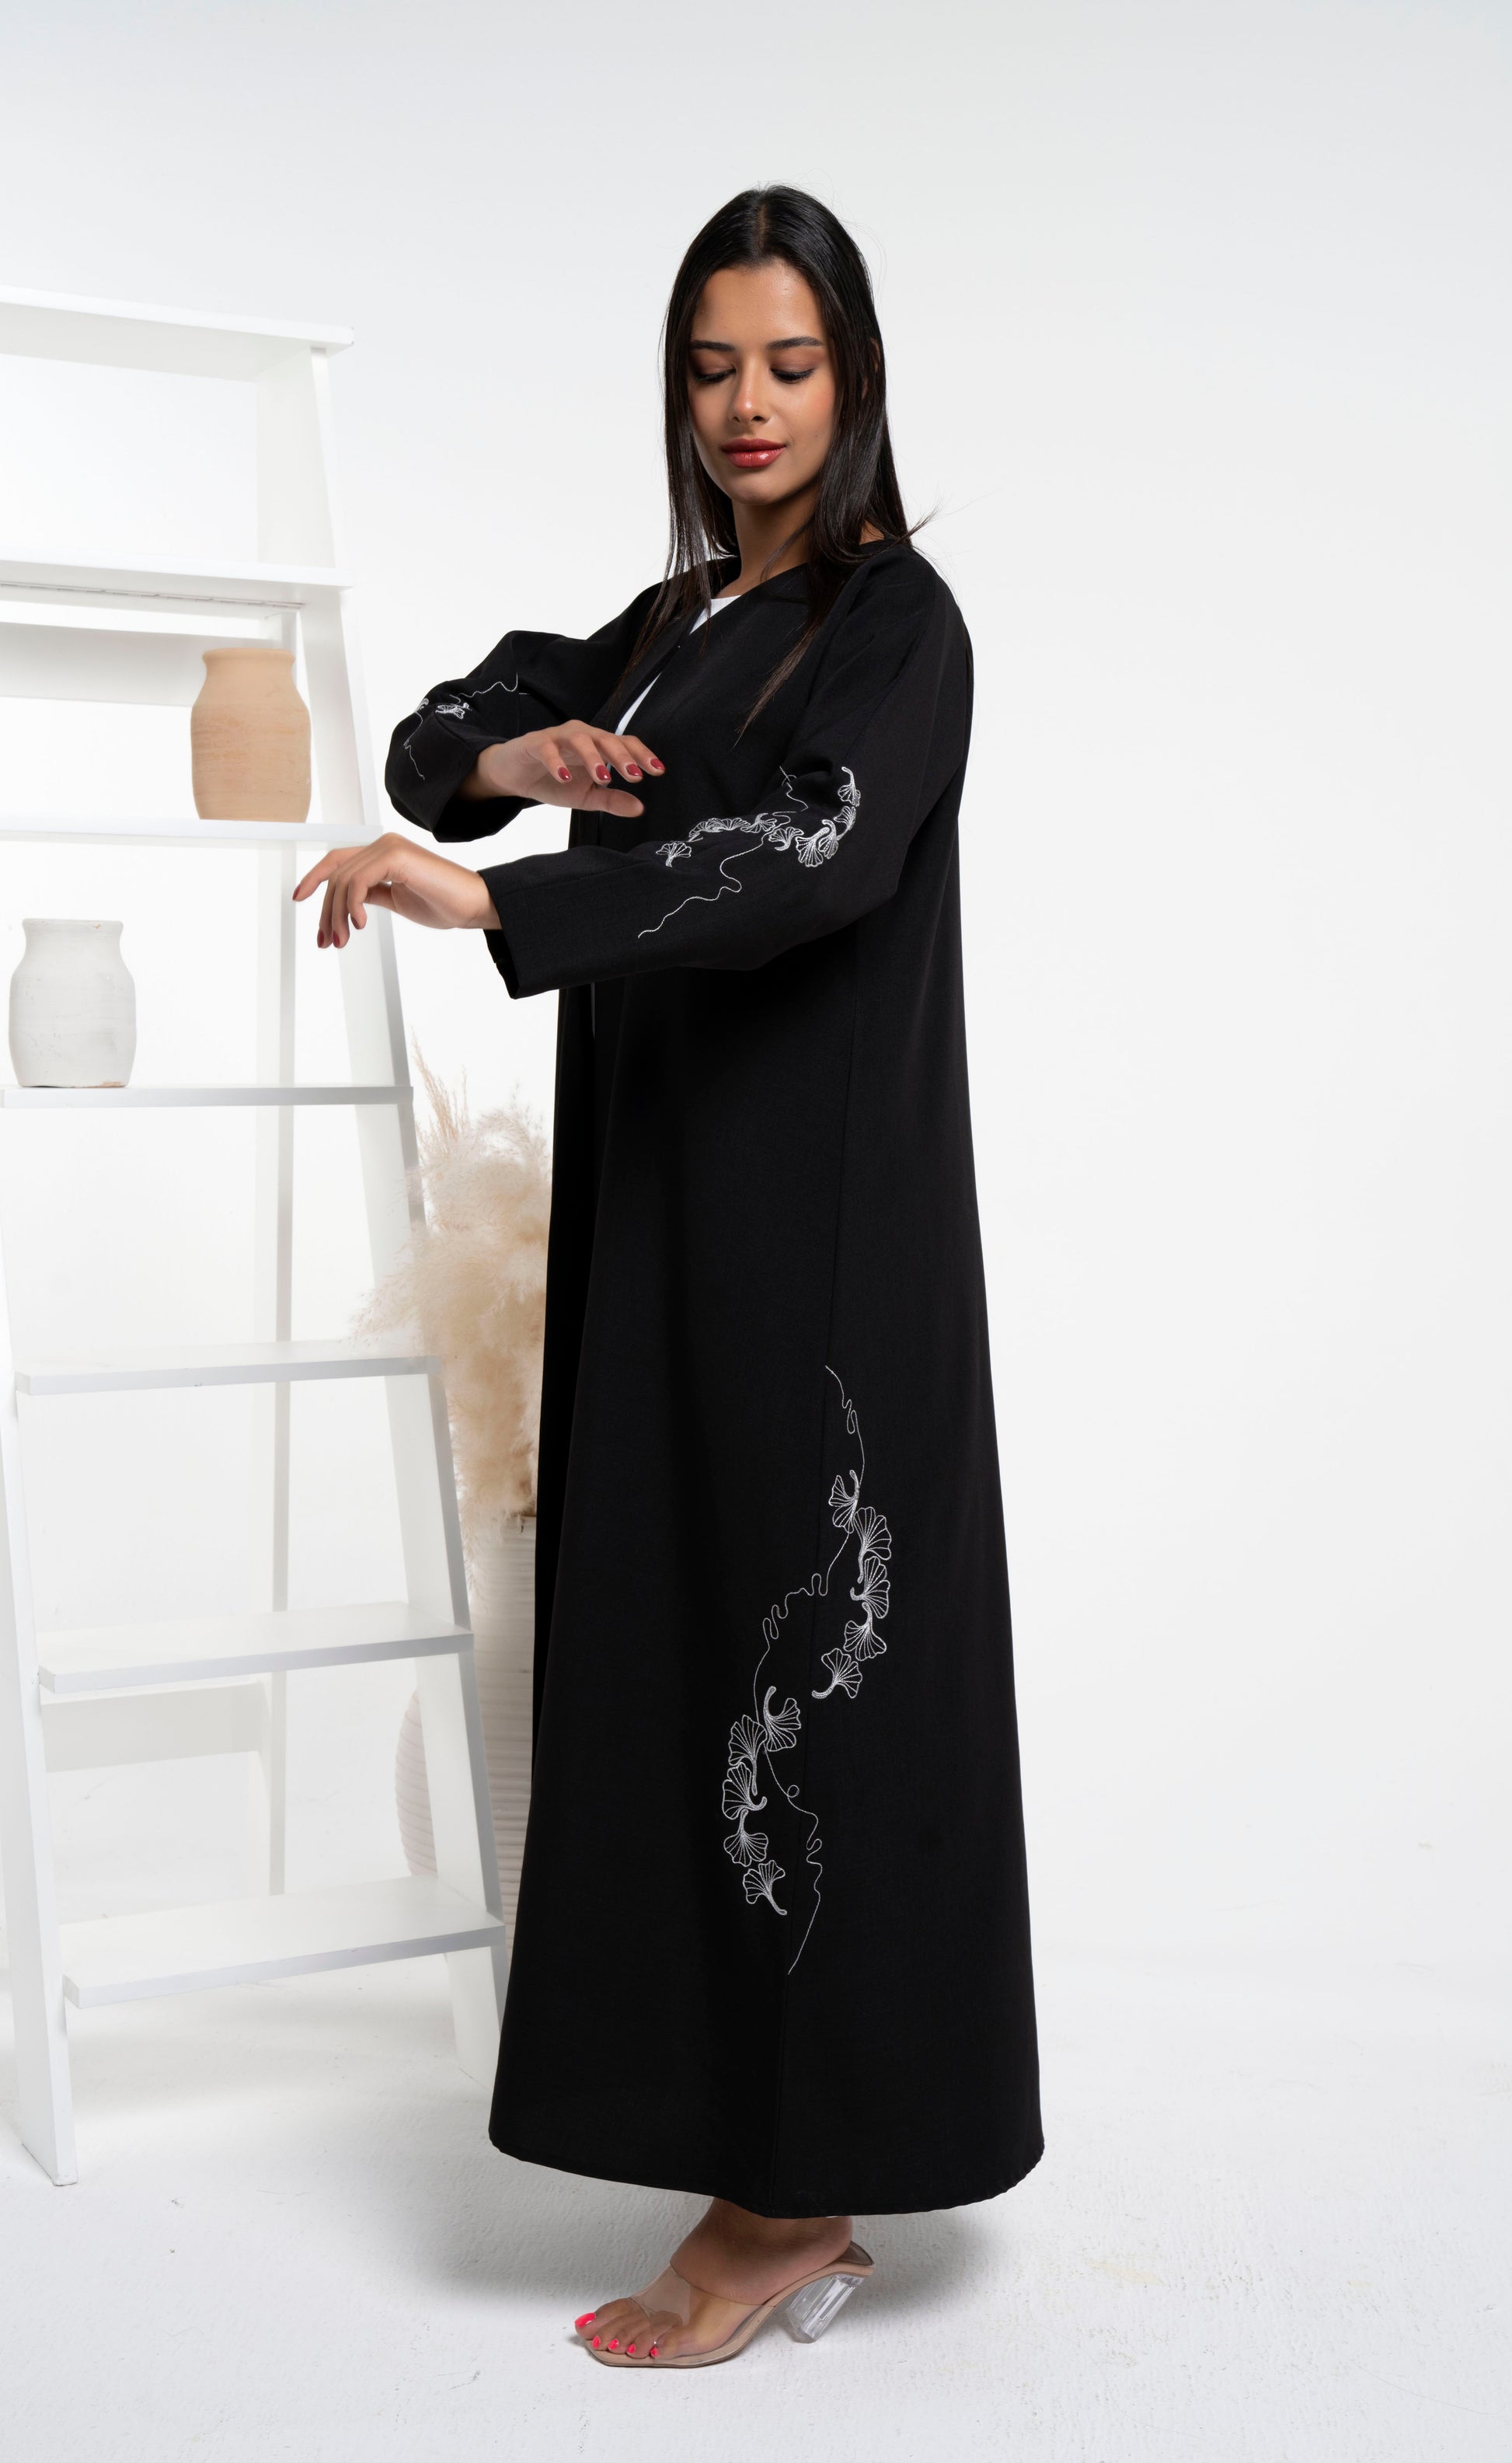 Black abaya with white floral embroidery on side and sleeves